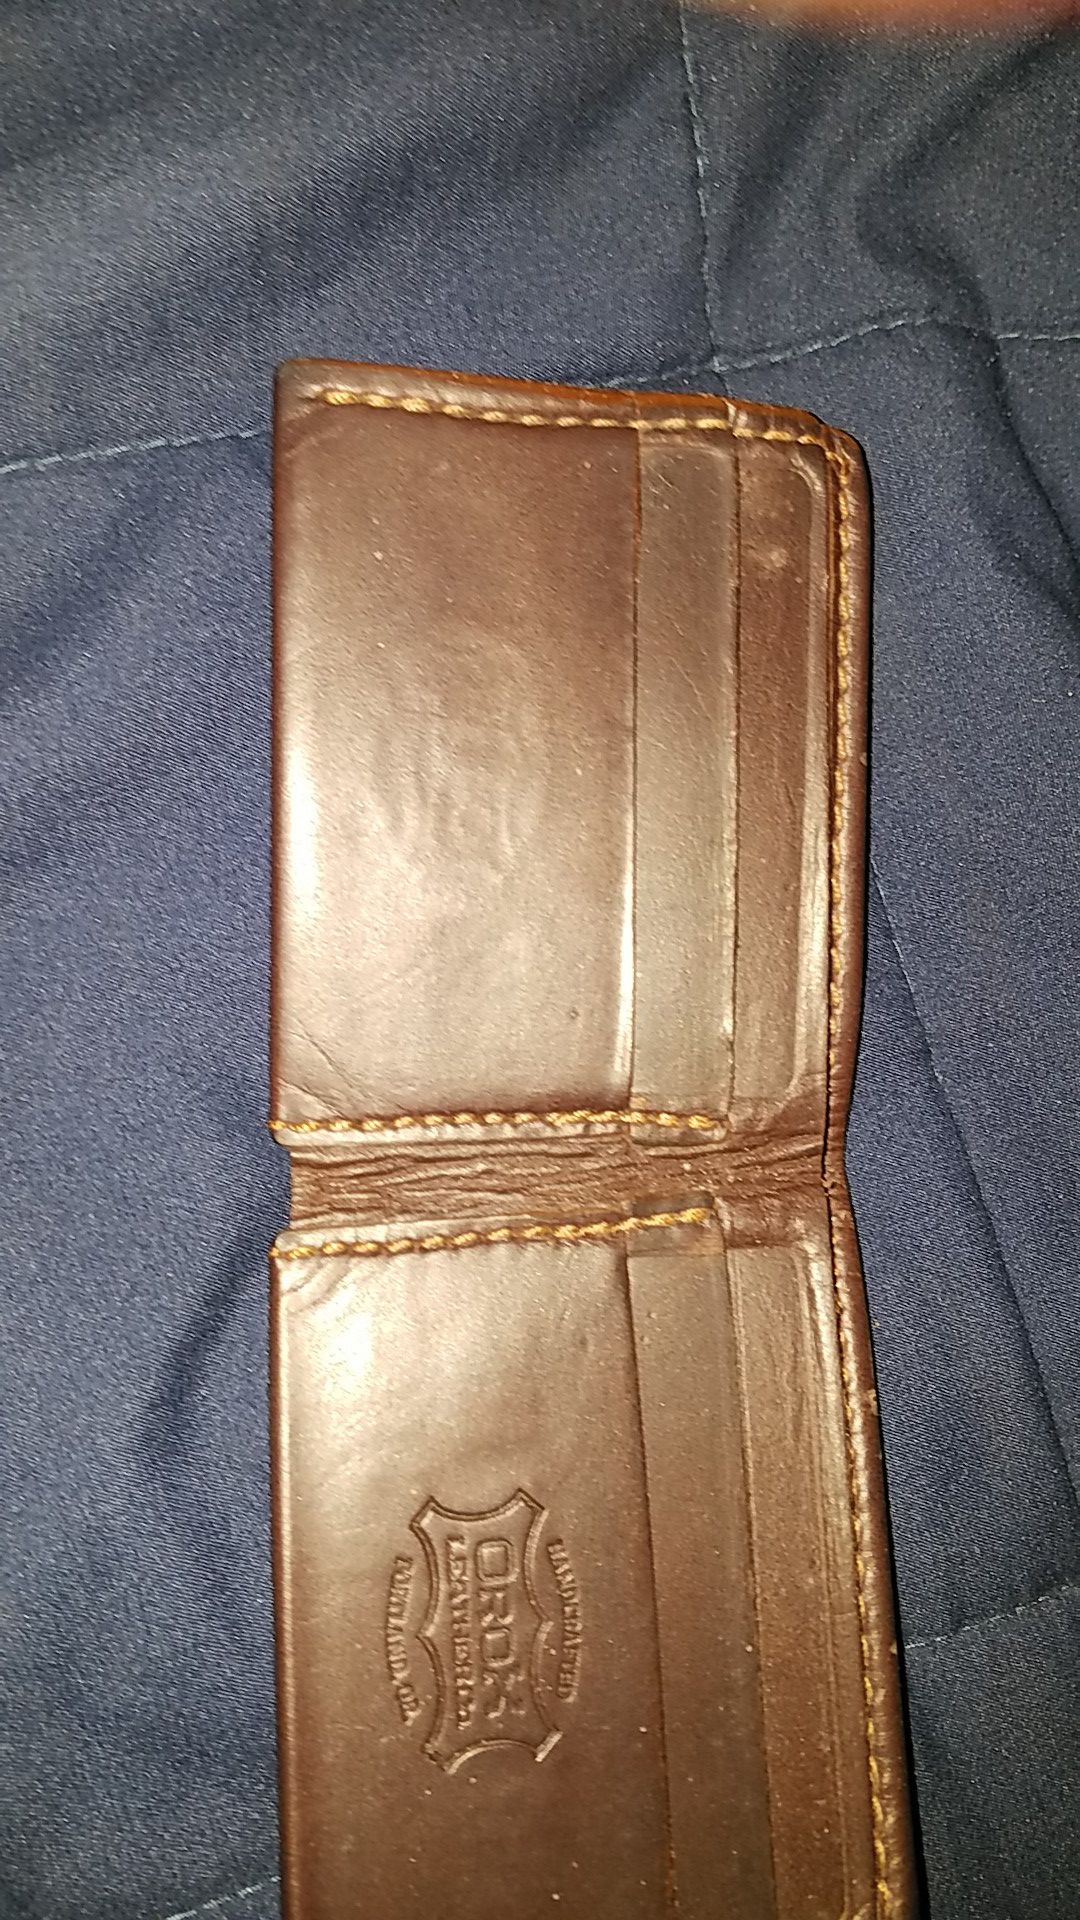 Orox leather wallet